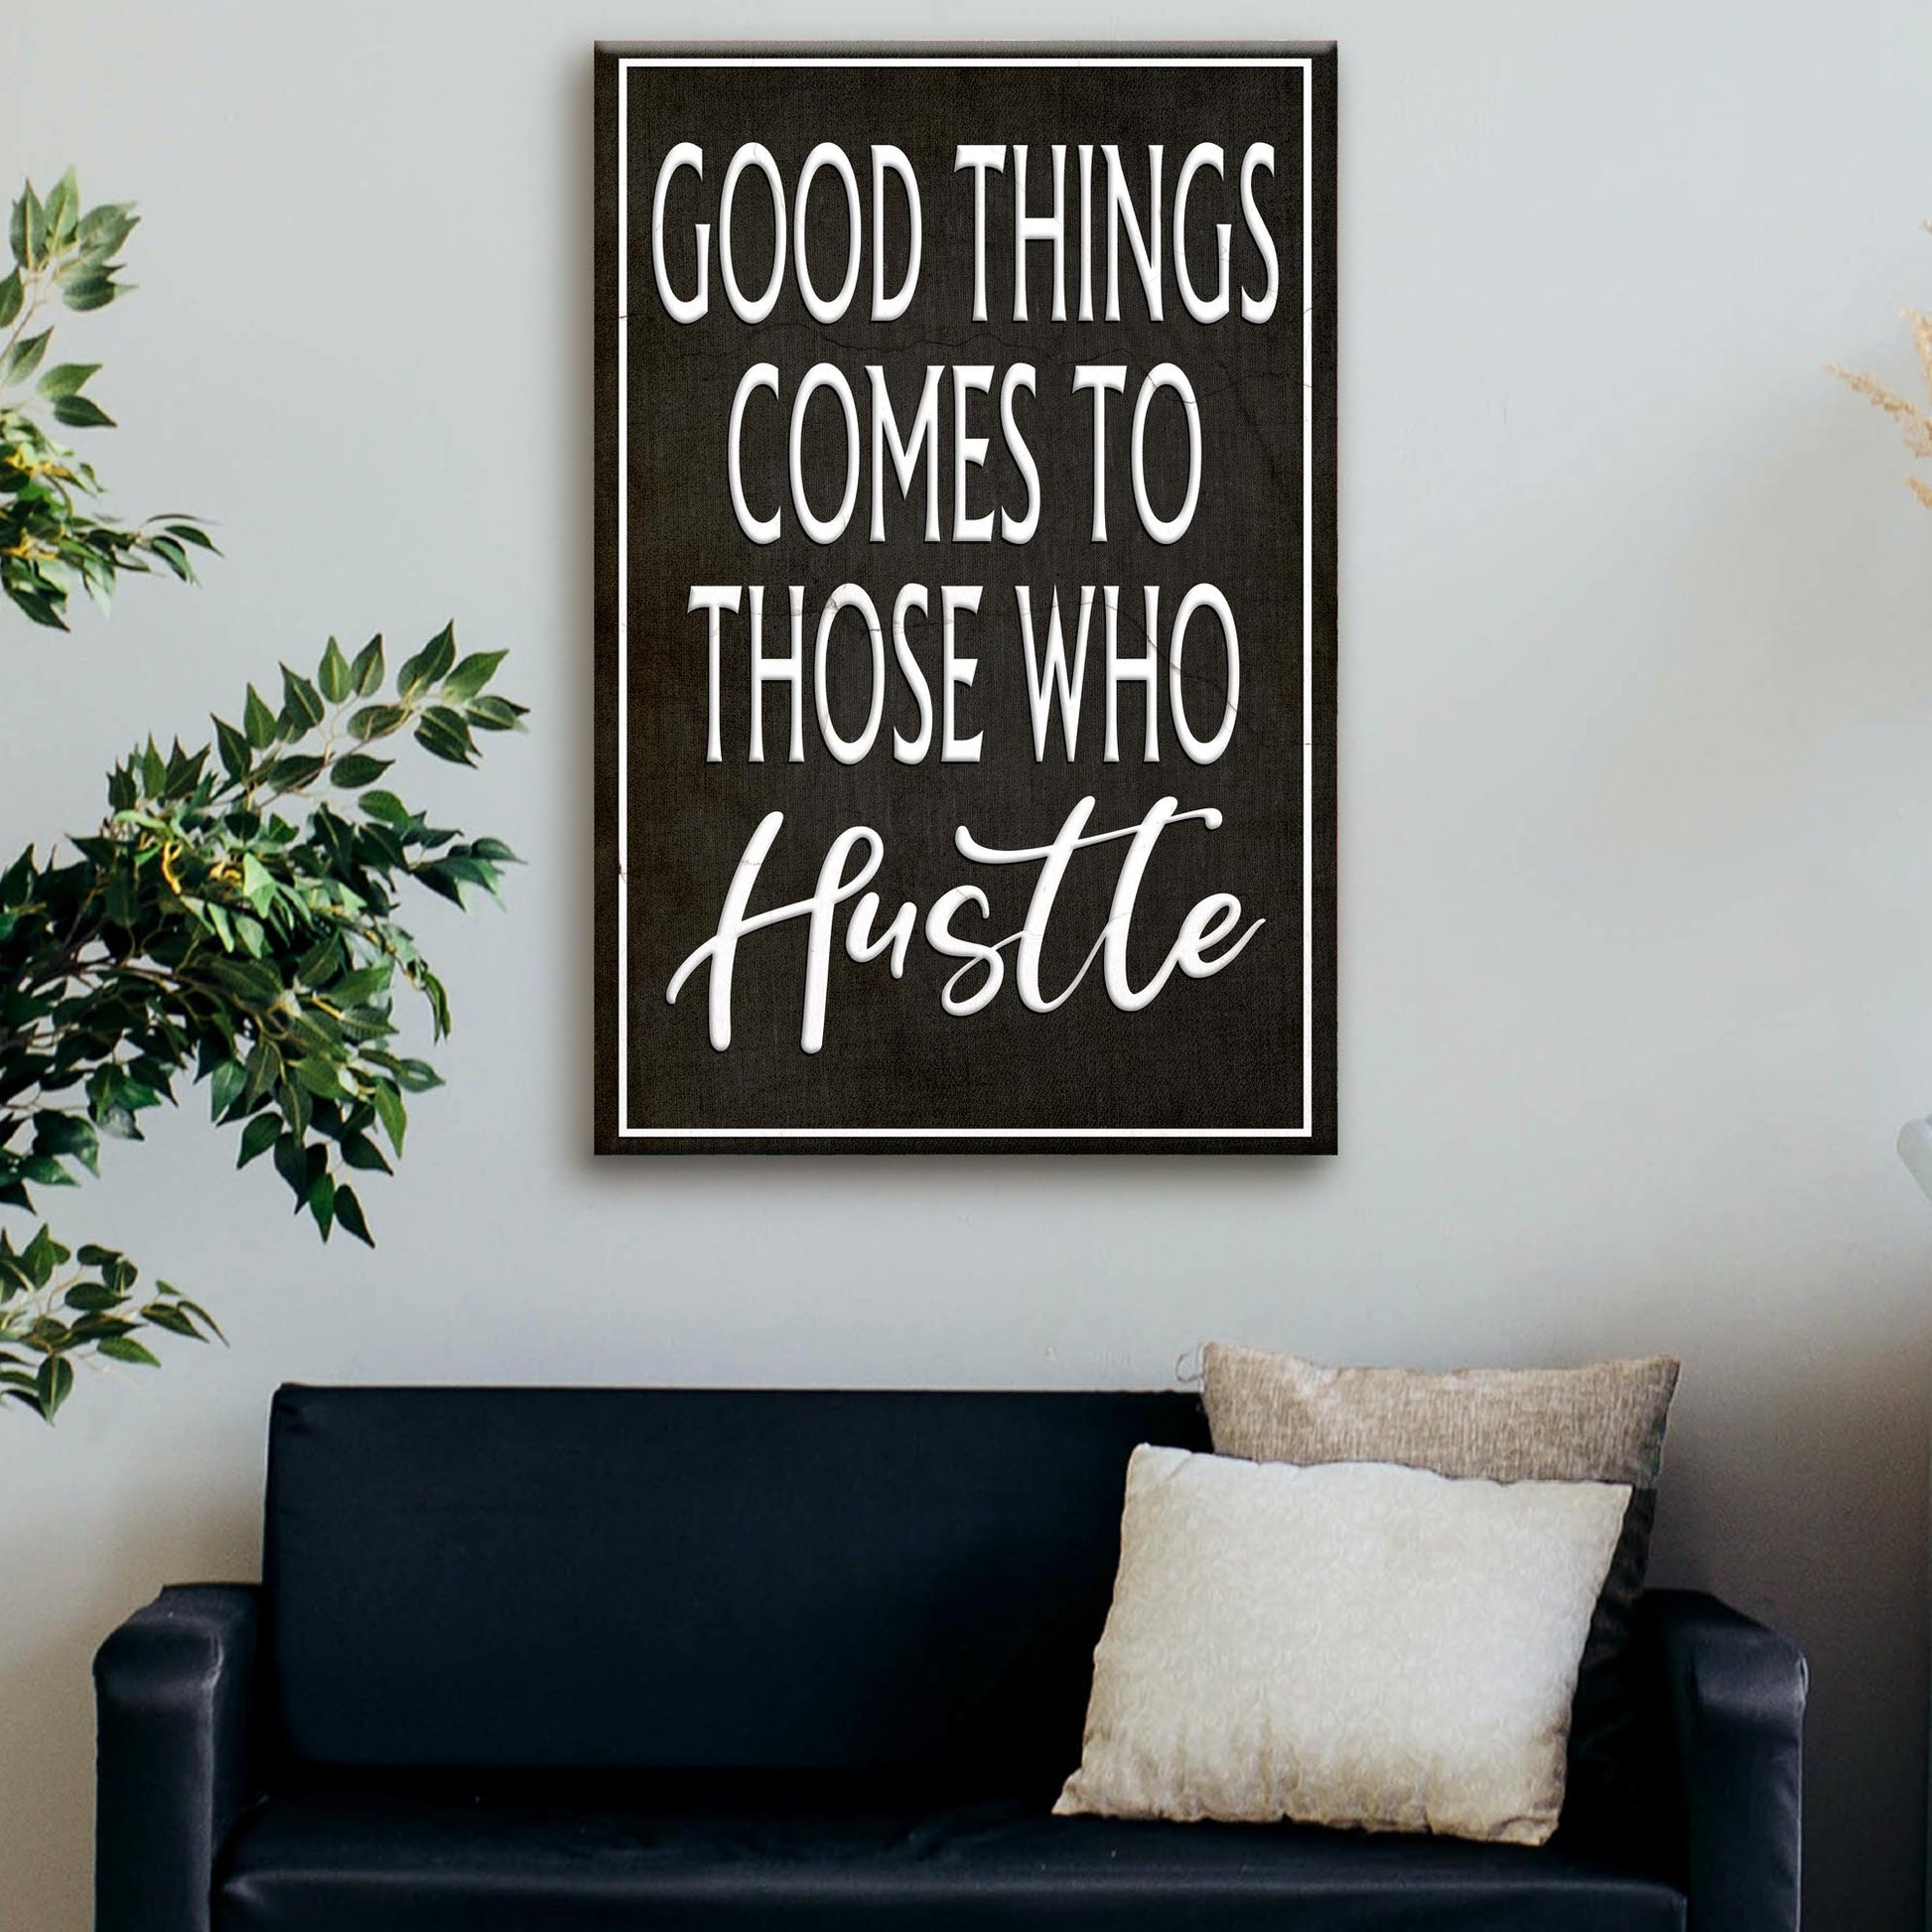 Good Things Come To Those Who Hustle Sign III - Image by Tailored Canvases